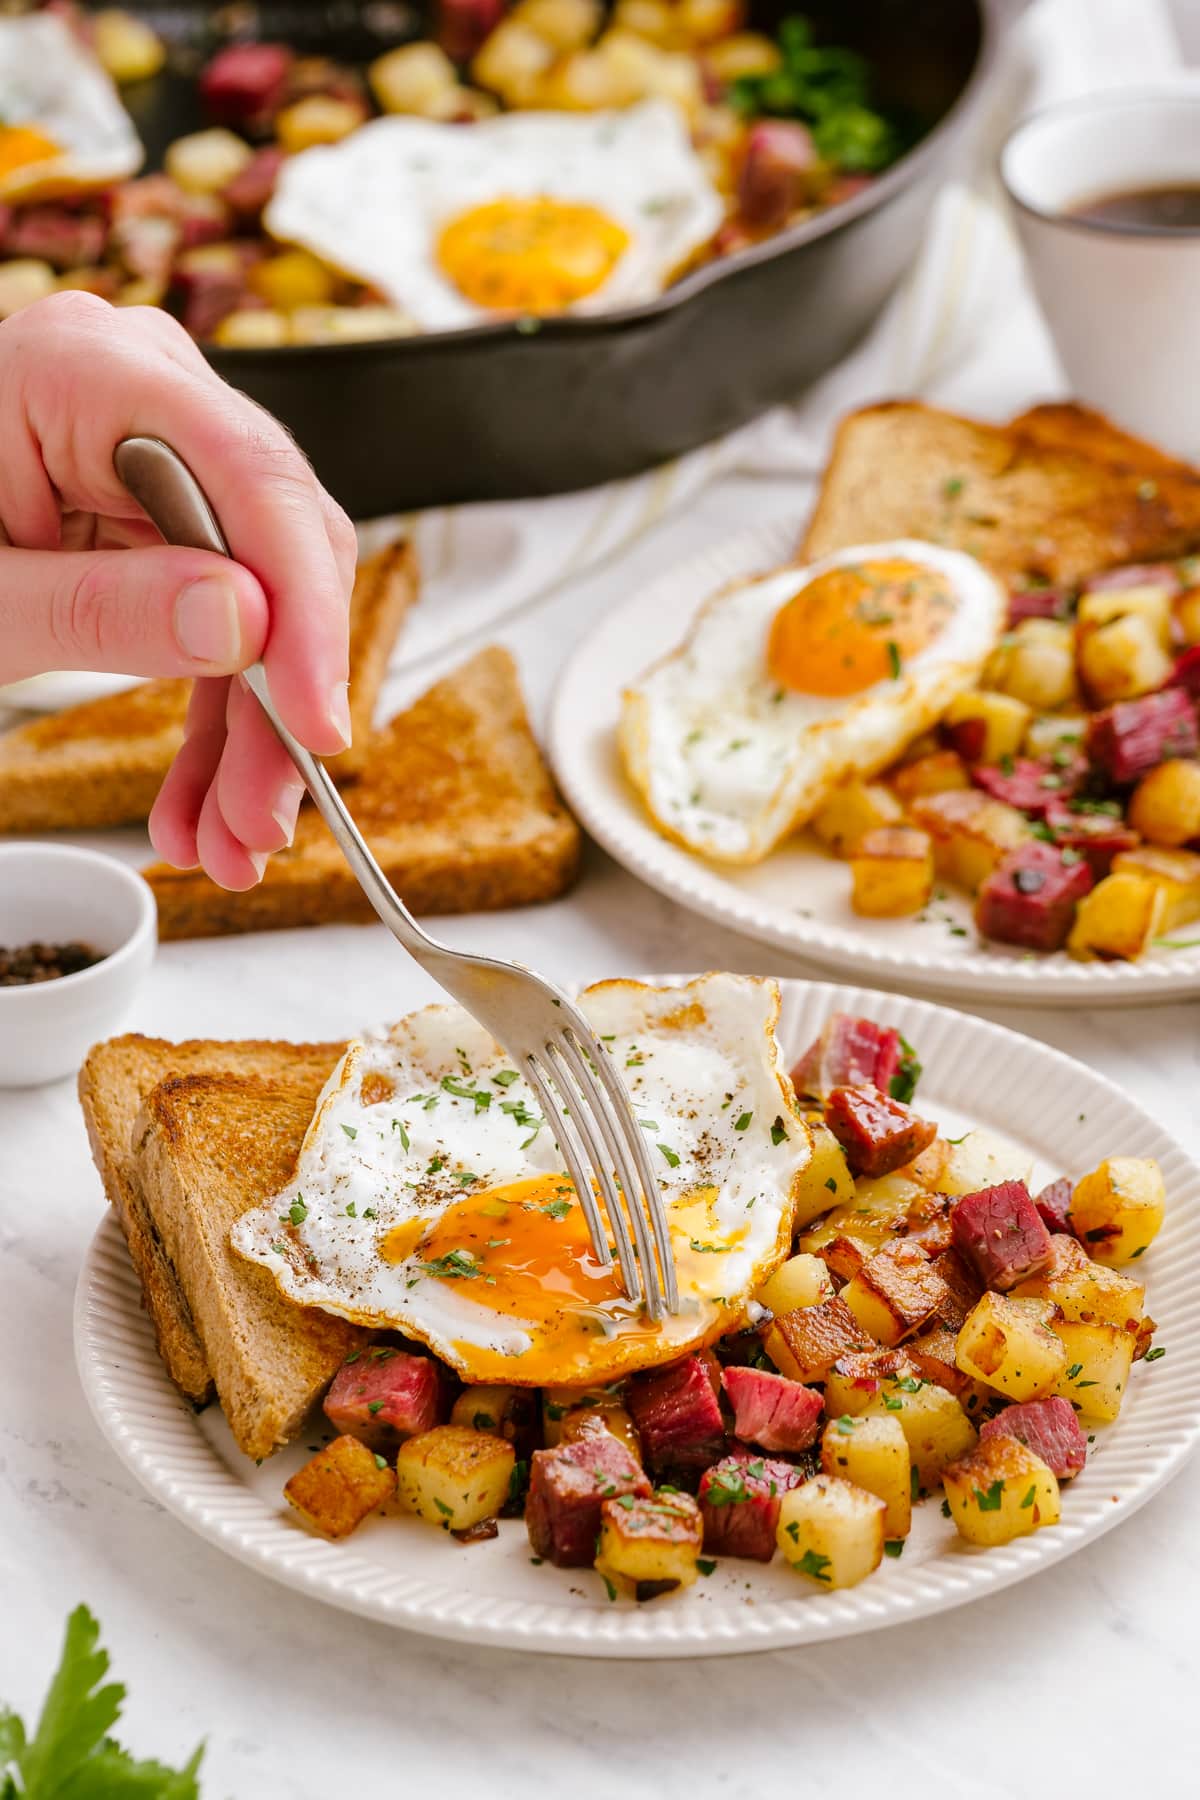 corned beef hash on a plate with a woman's hand cutting into the egg yolk